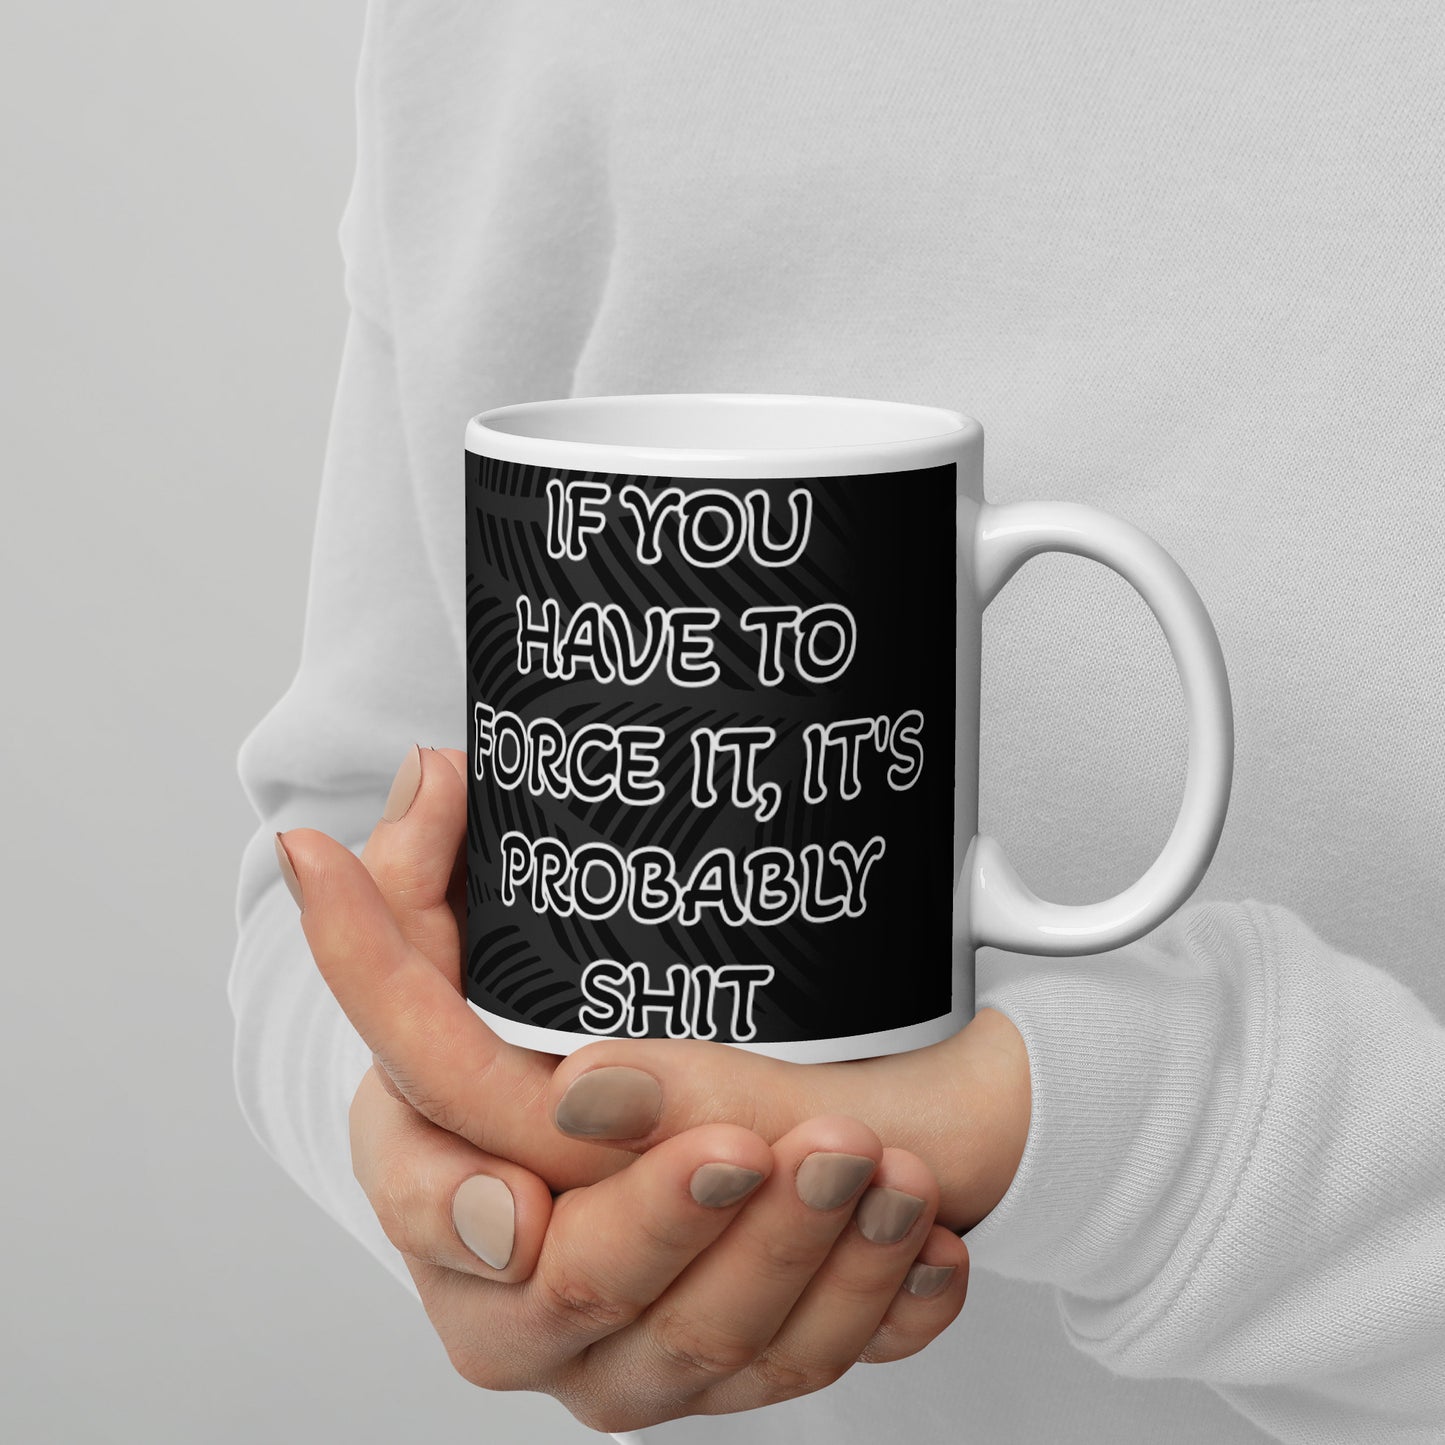 IF YOU HAVE TO FORCE IT, IT'S PROBABLY SHIT- White glossy mug